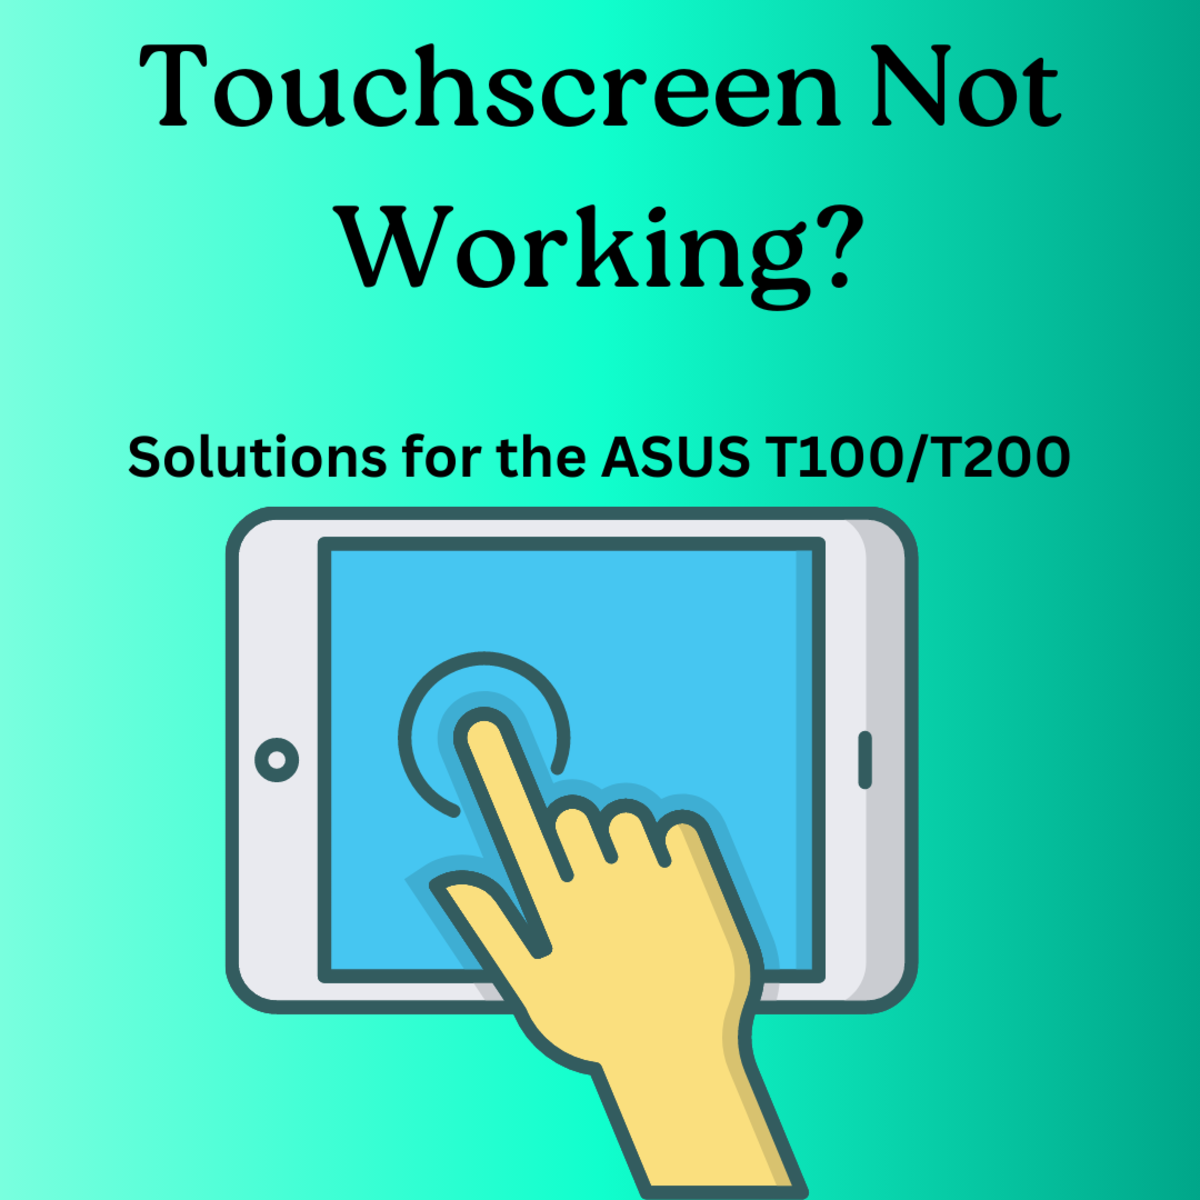 ASUS T100/T200 Touchscreen Not Working? Here's a Solution!